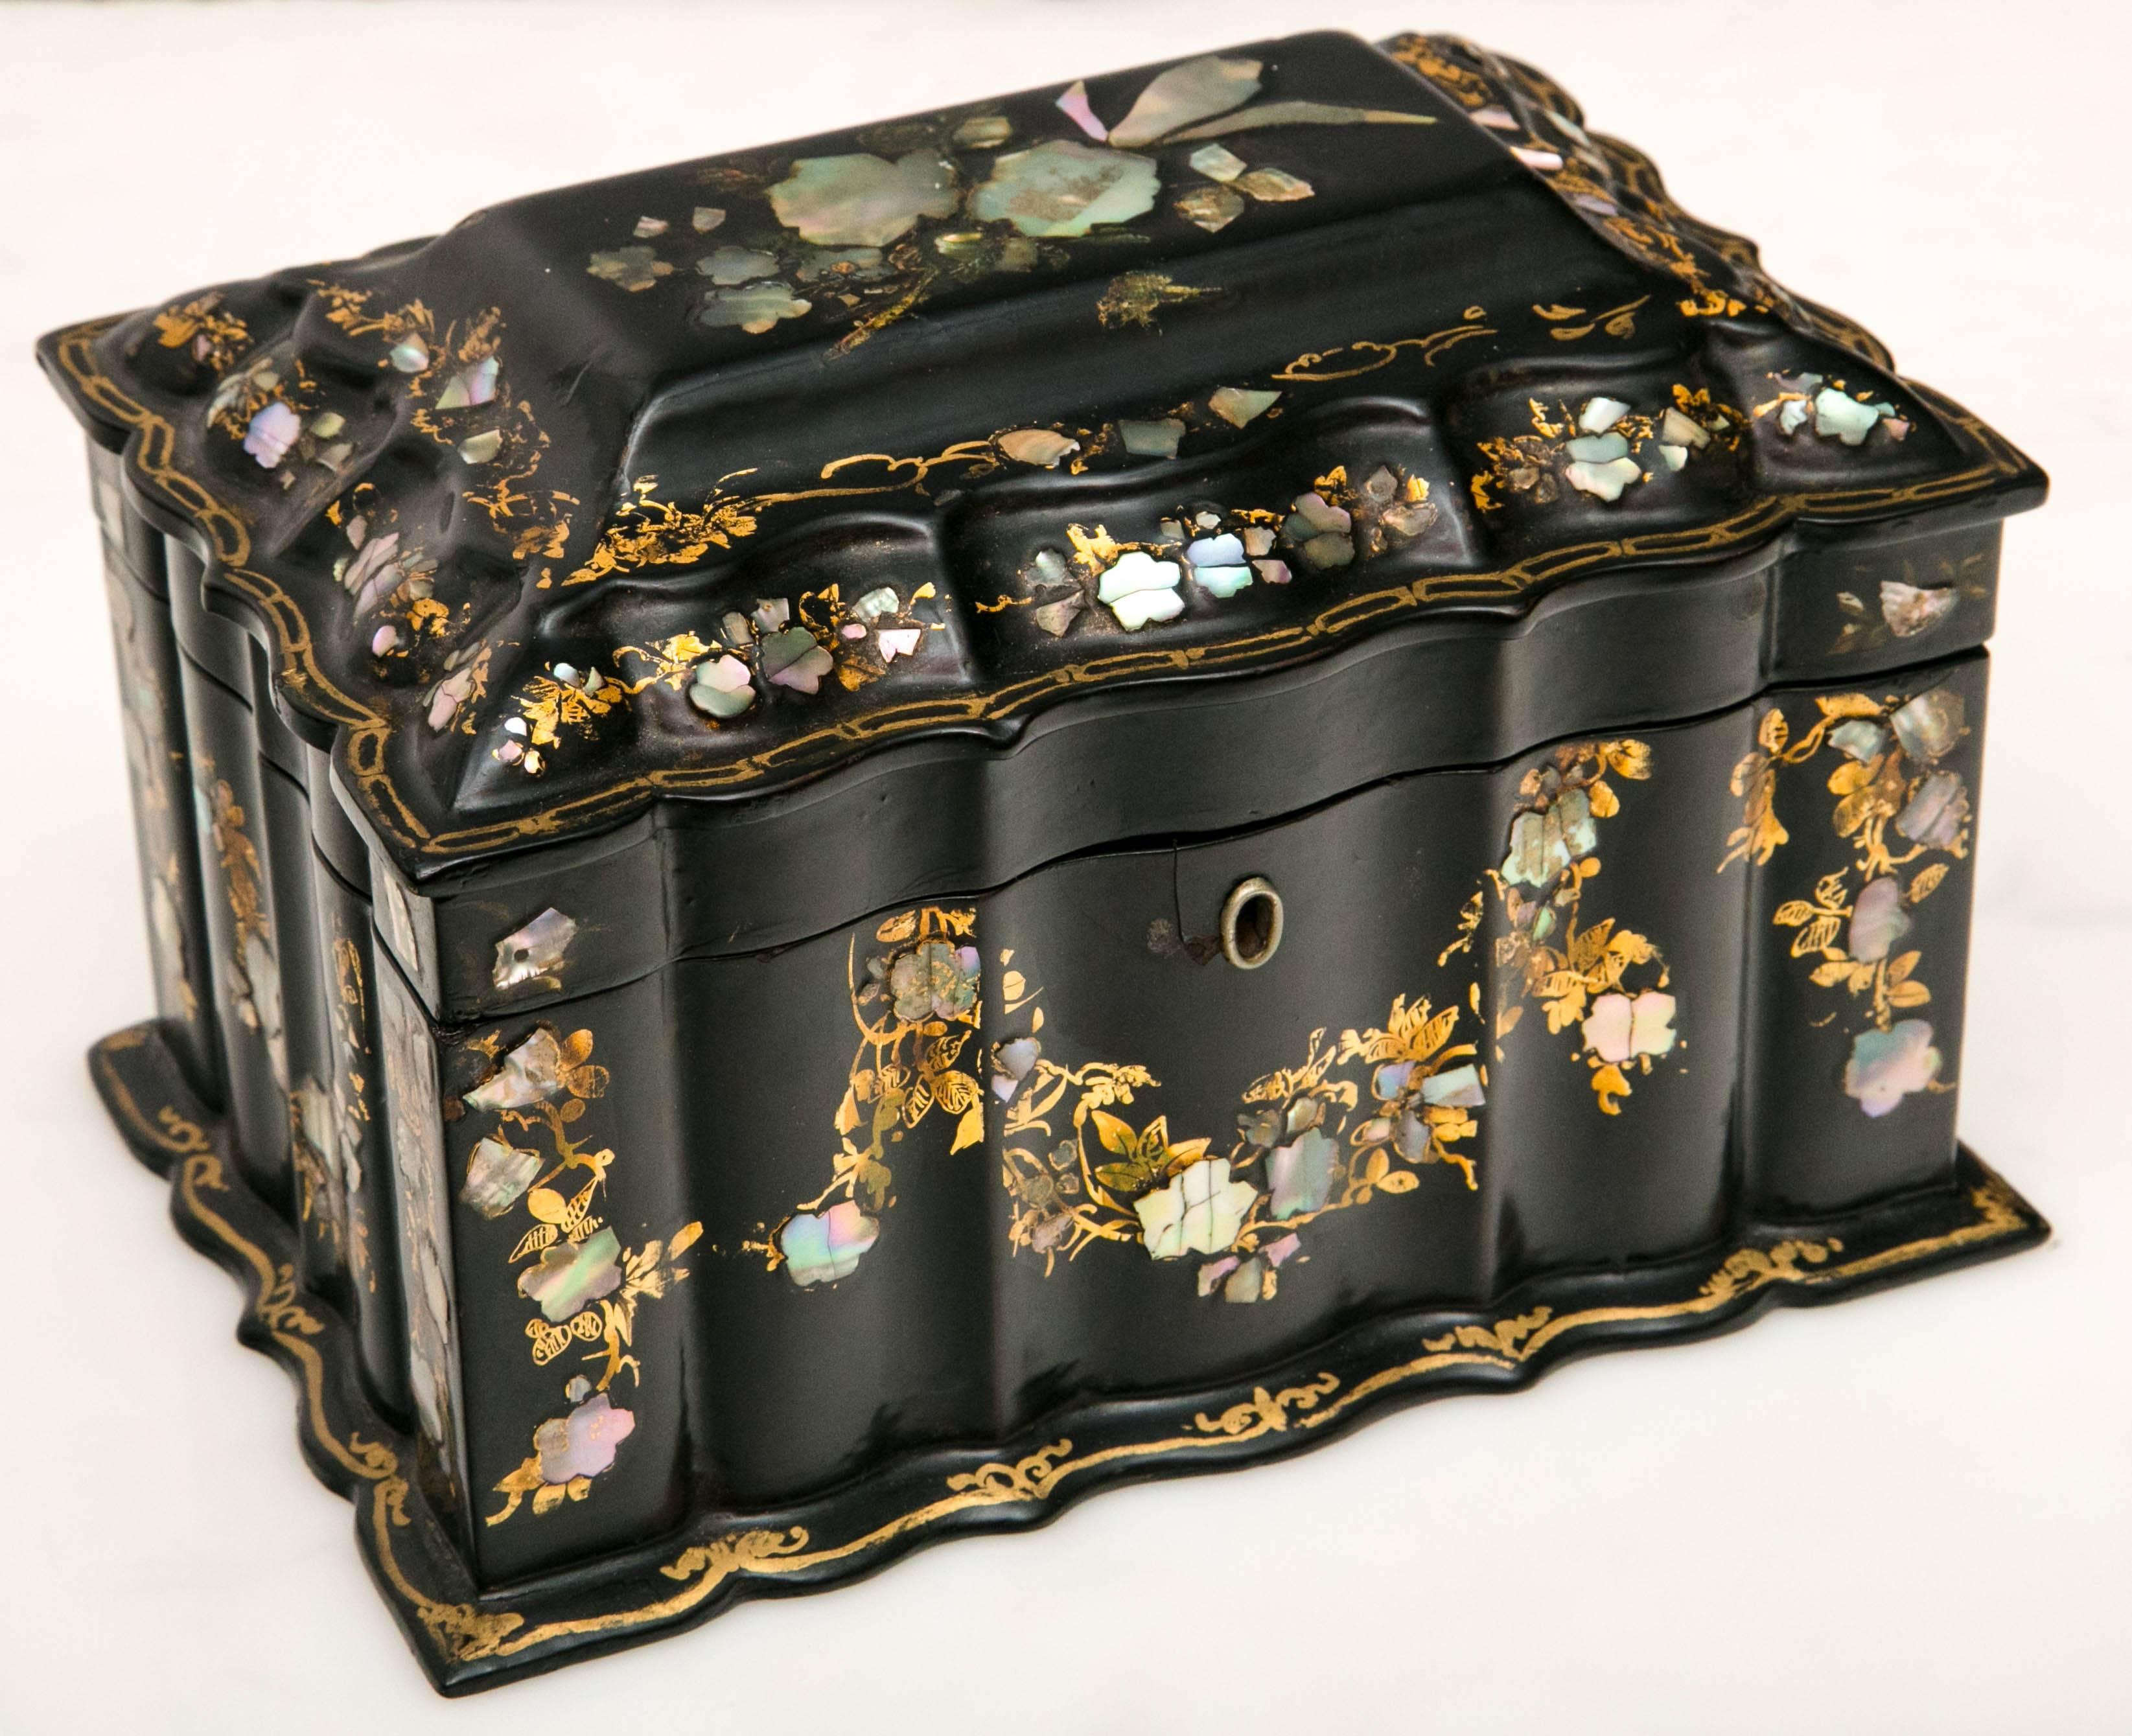 An antique papier-mâché tea caddy featuring mother-of-pearl and Abalone. The Mid-Victorian caddy with has two interior compartments for tea. The top features a design with a central floral display with floral vine detail throughout.